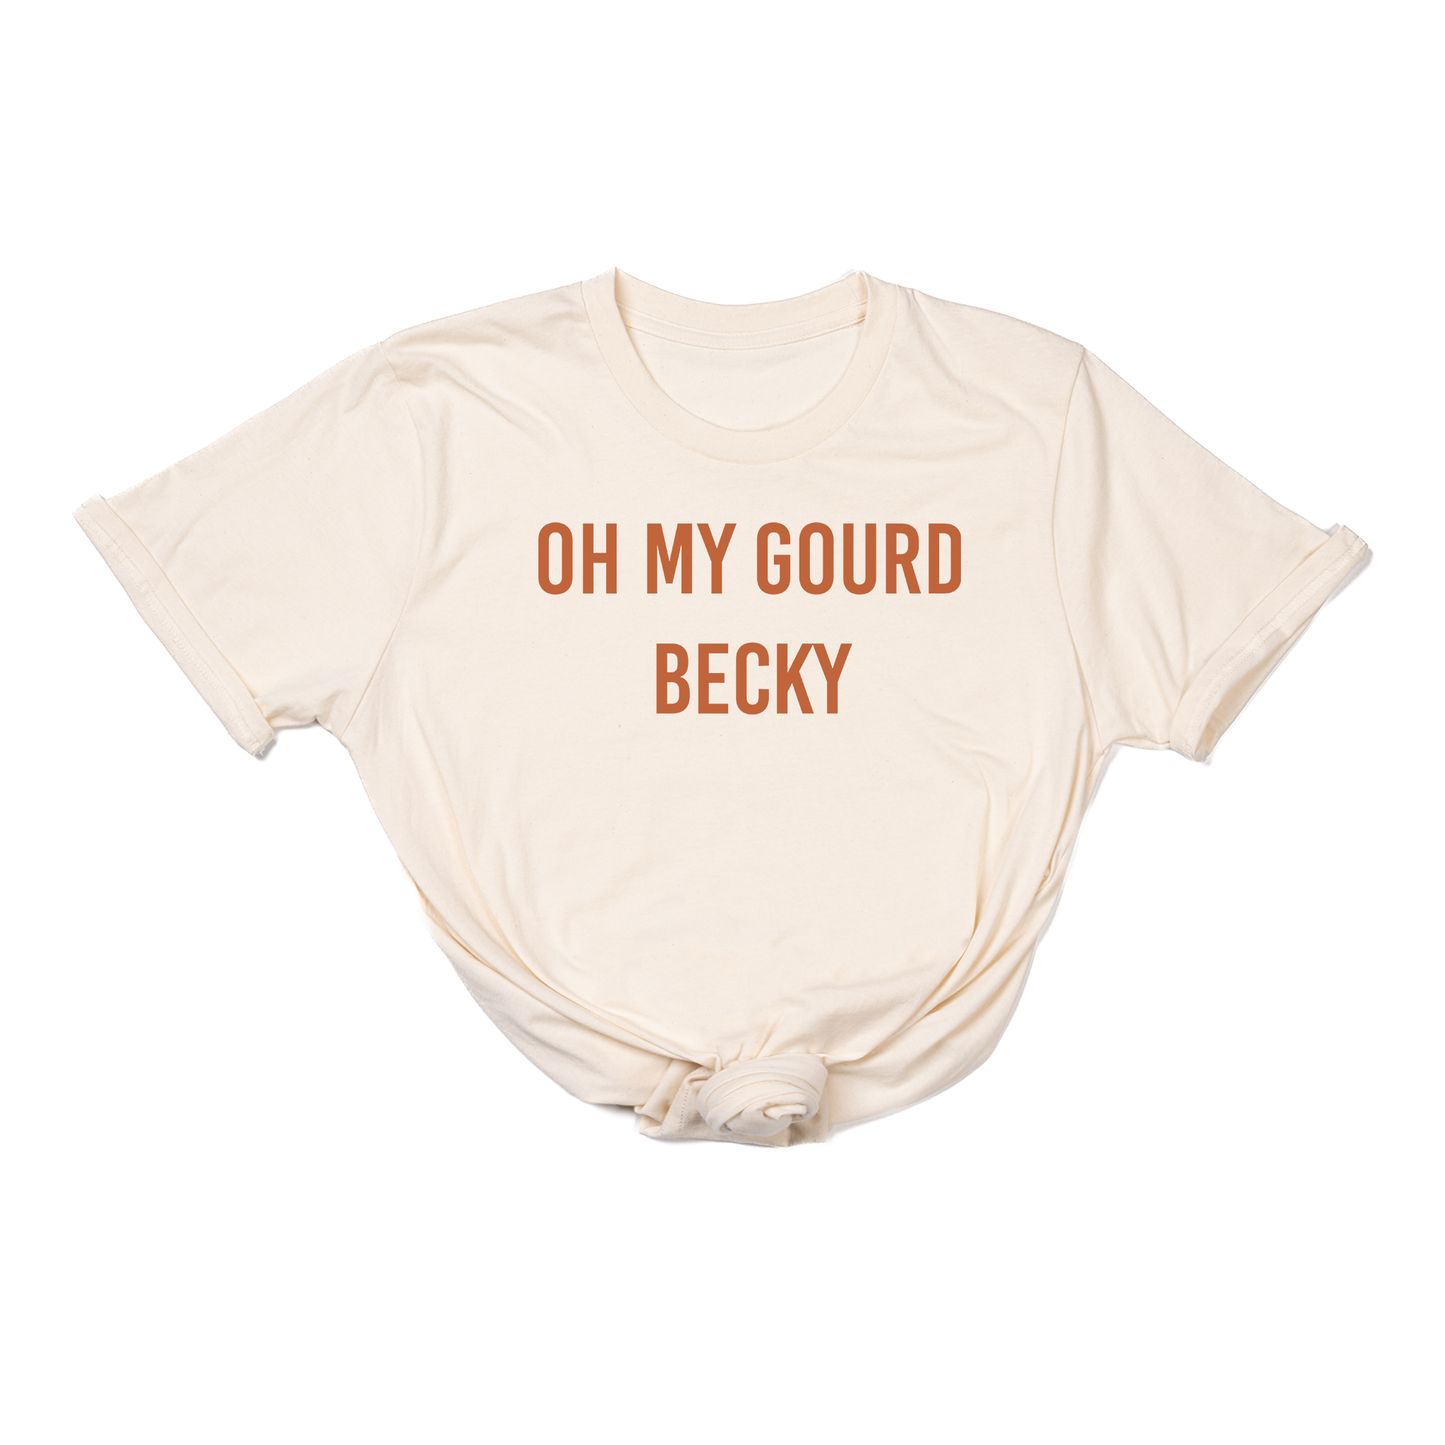 OH MY GOURD BECKY (Rust) - Tee (Natural)